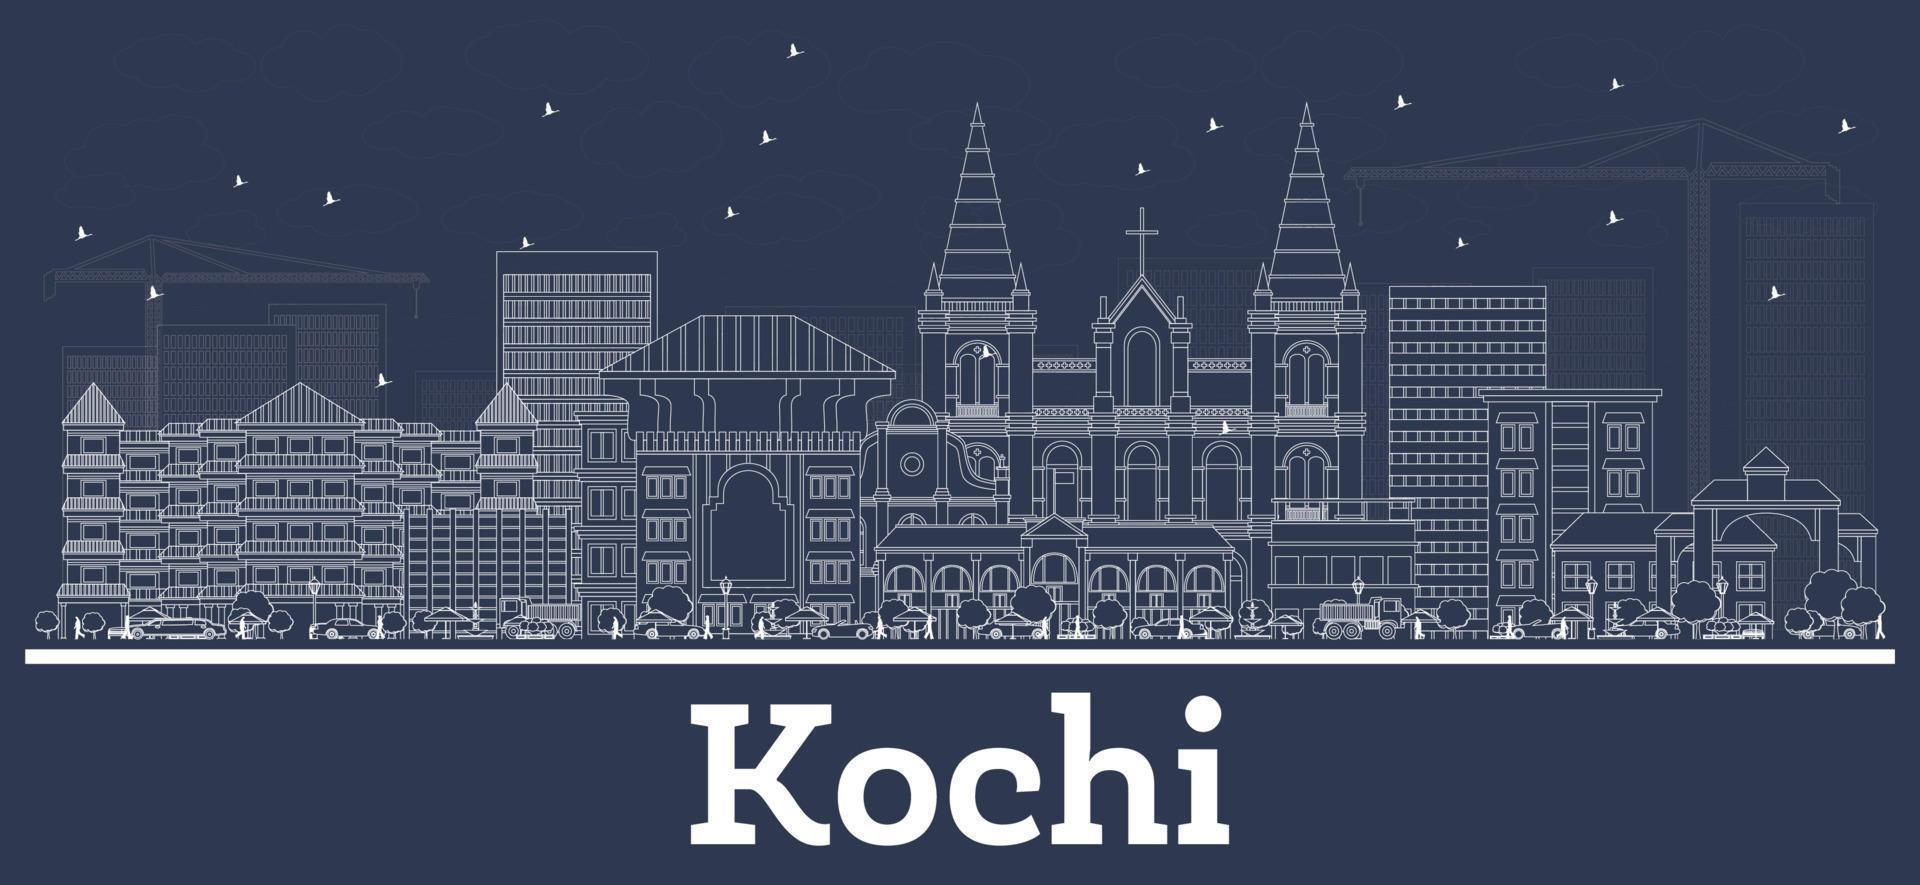 Outline Kochi India City Skyline with White Buildings. vector